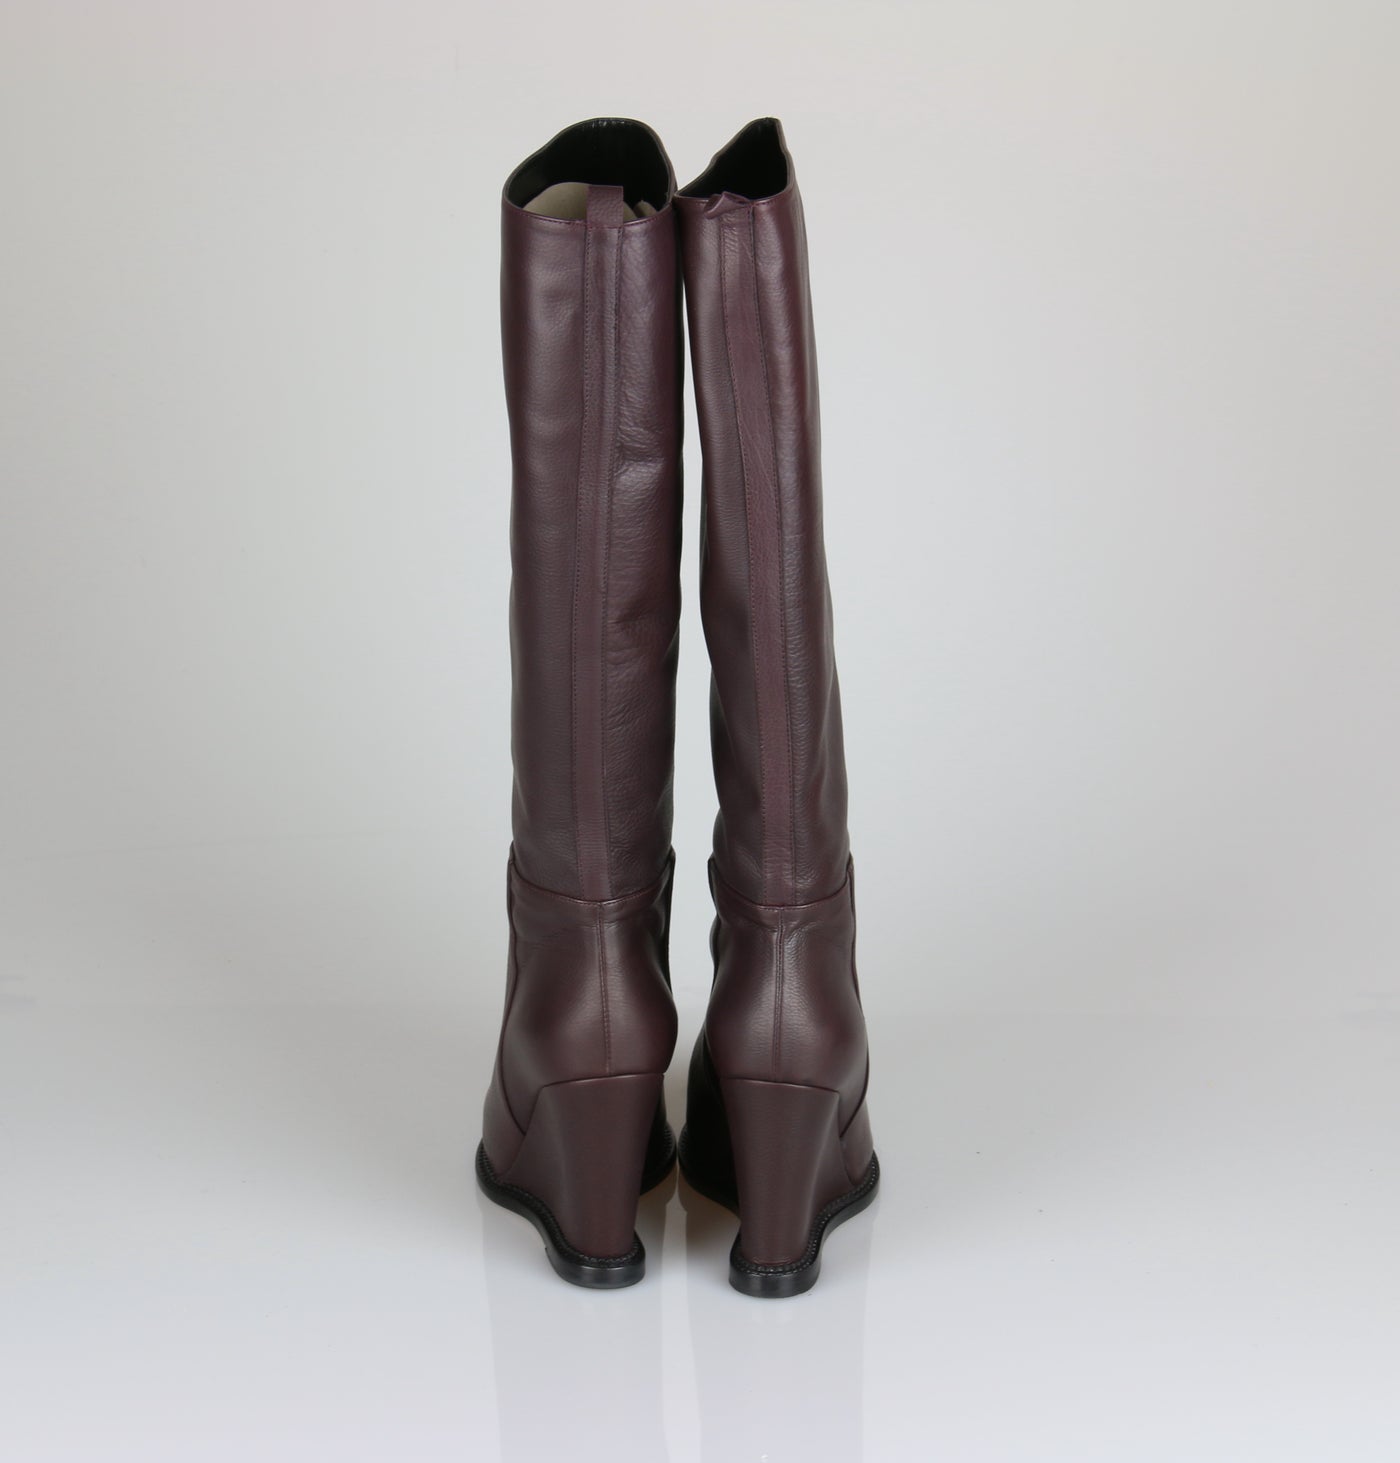 Burgundy wedge leather boots